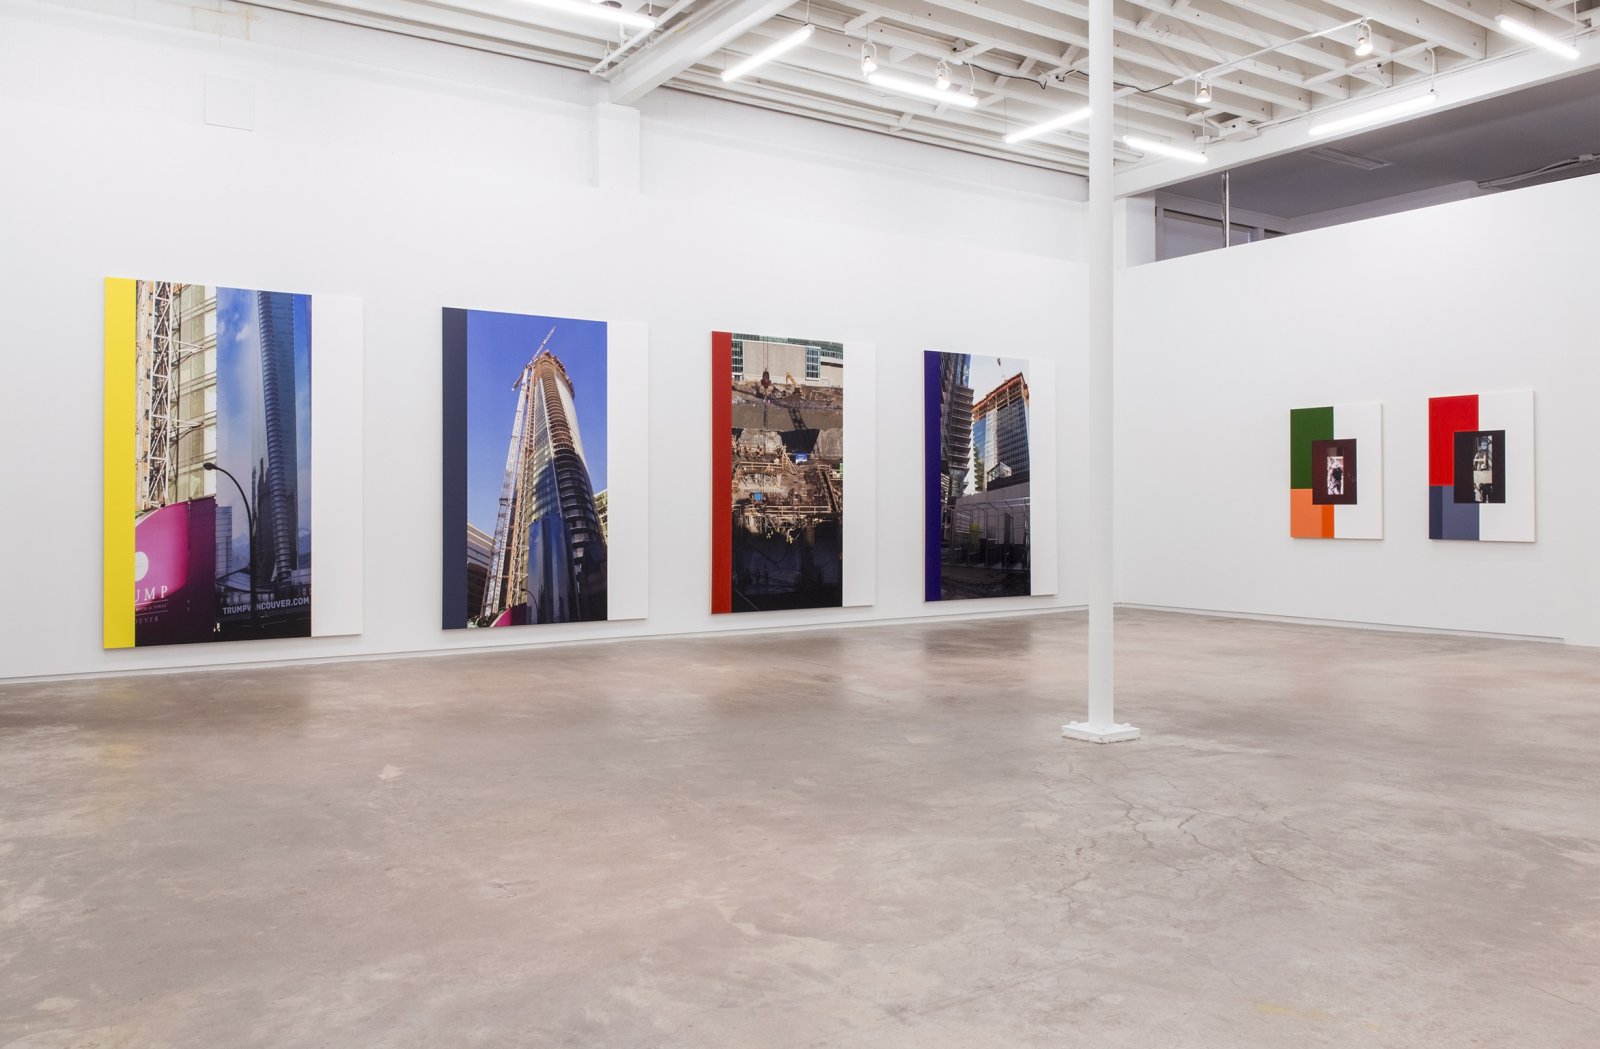 Ian Wallace, installation view, The Construction Site, Catriona Jeffries, 2015 by Ian Wallace